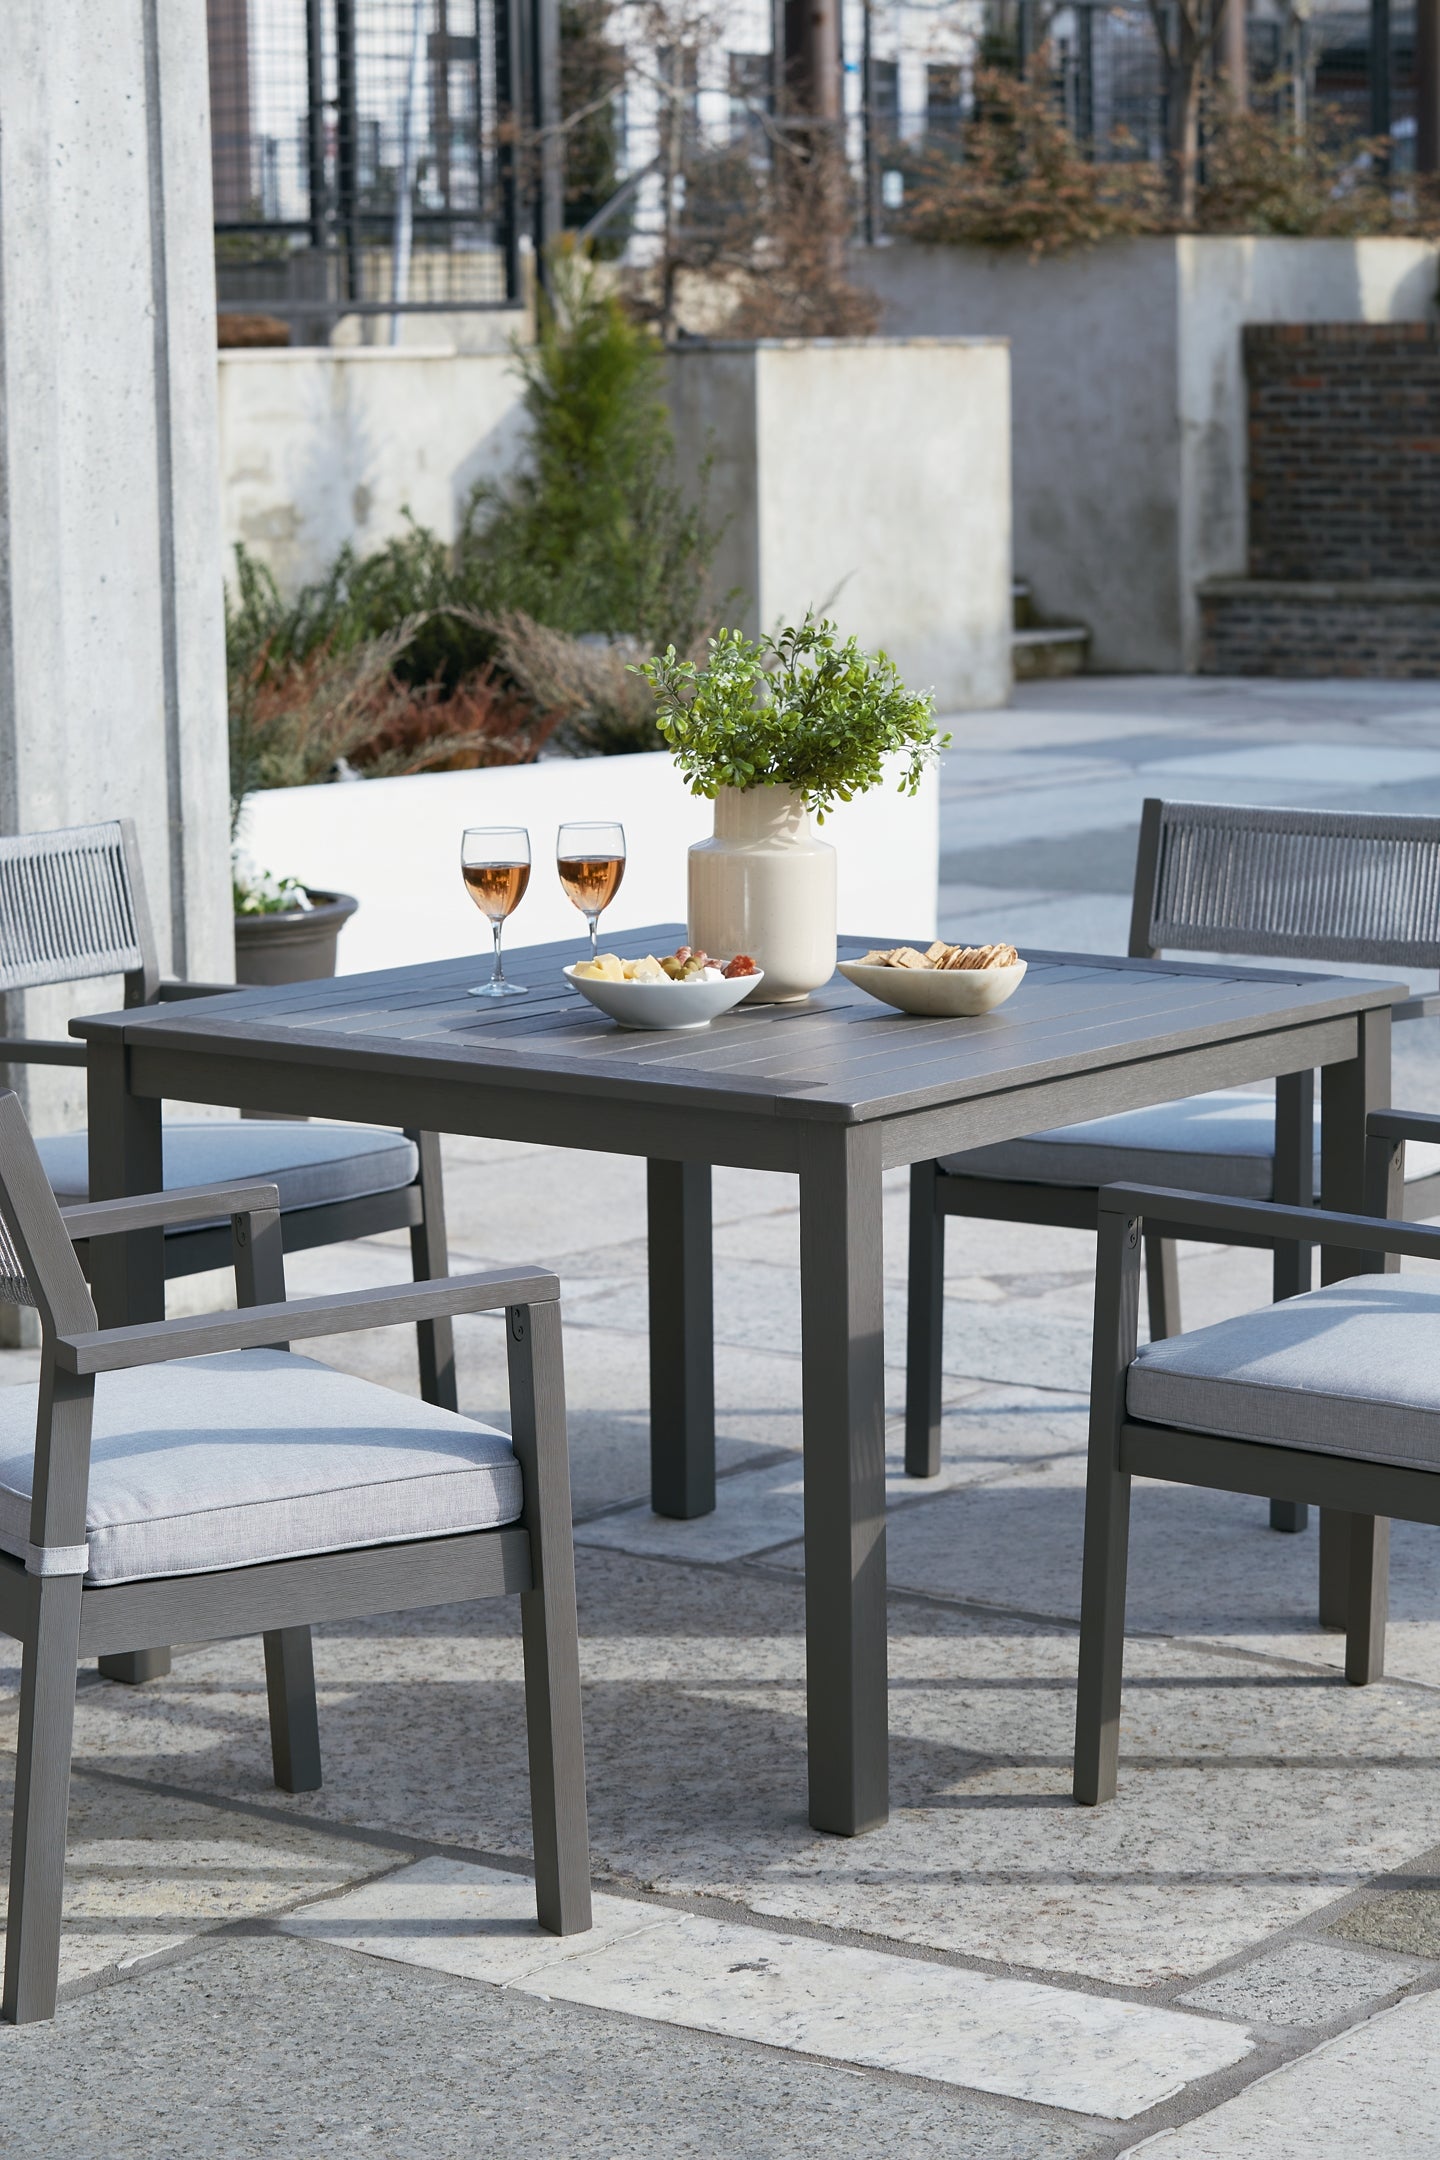 Ashley Express - Eden Town Outdoor Dining Table and 4 Chairs